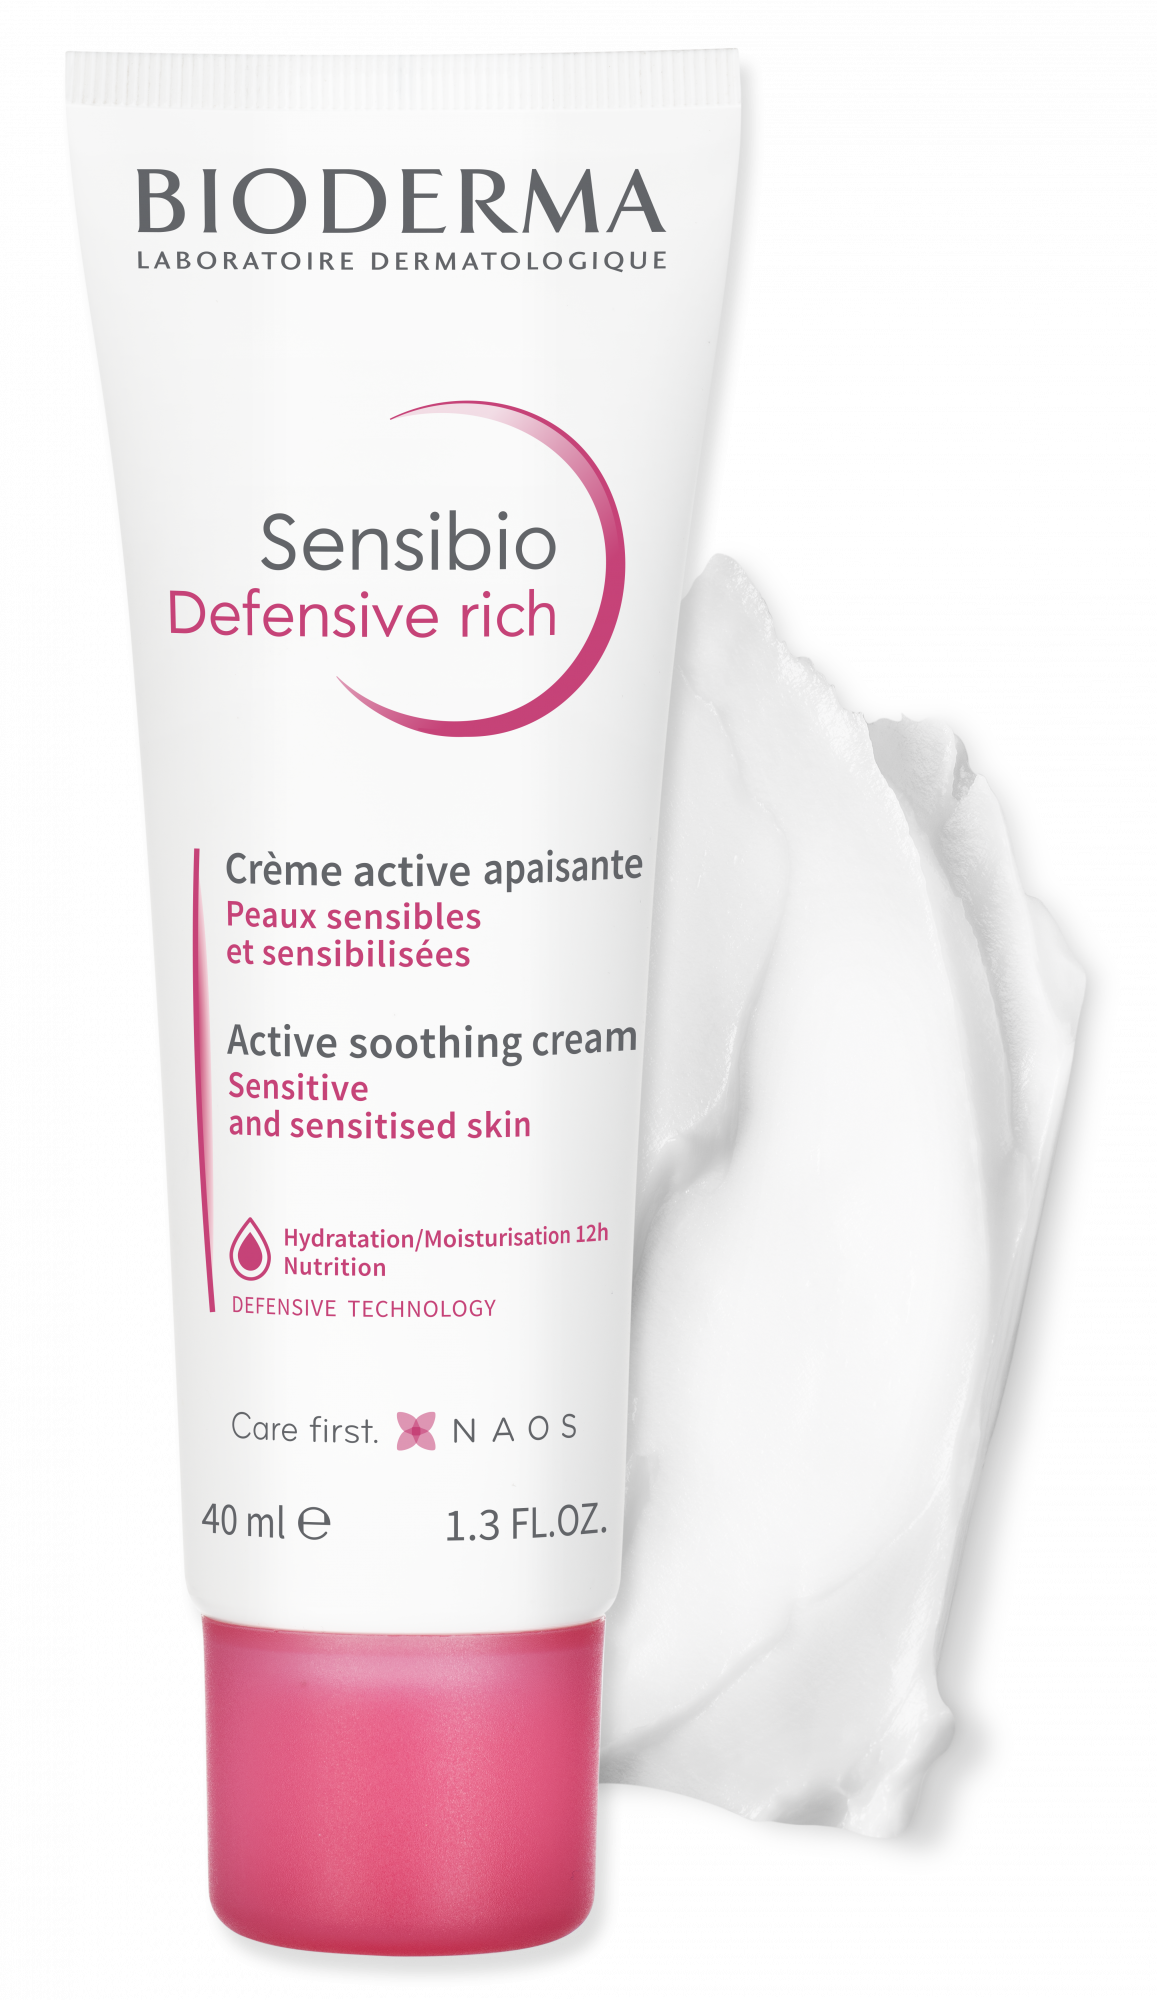 Sensibio Defensive Rich  Active soothing cream for sensitive and